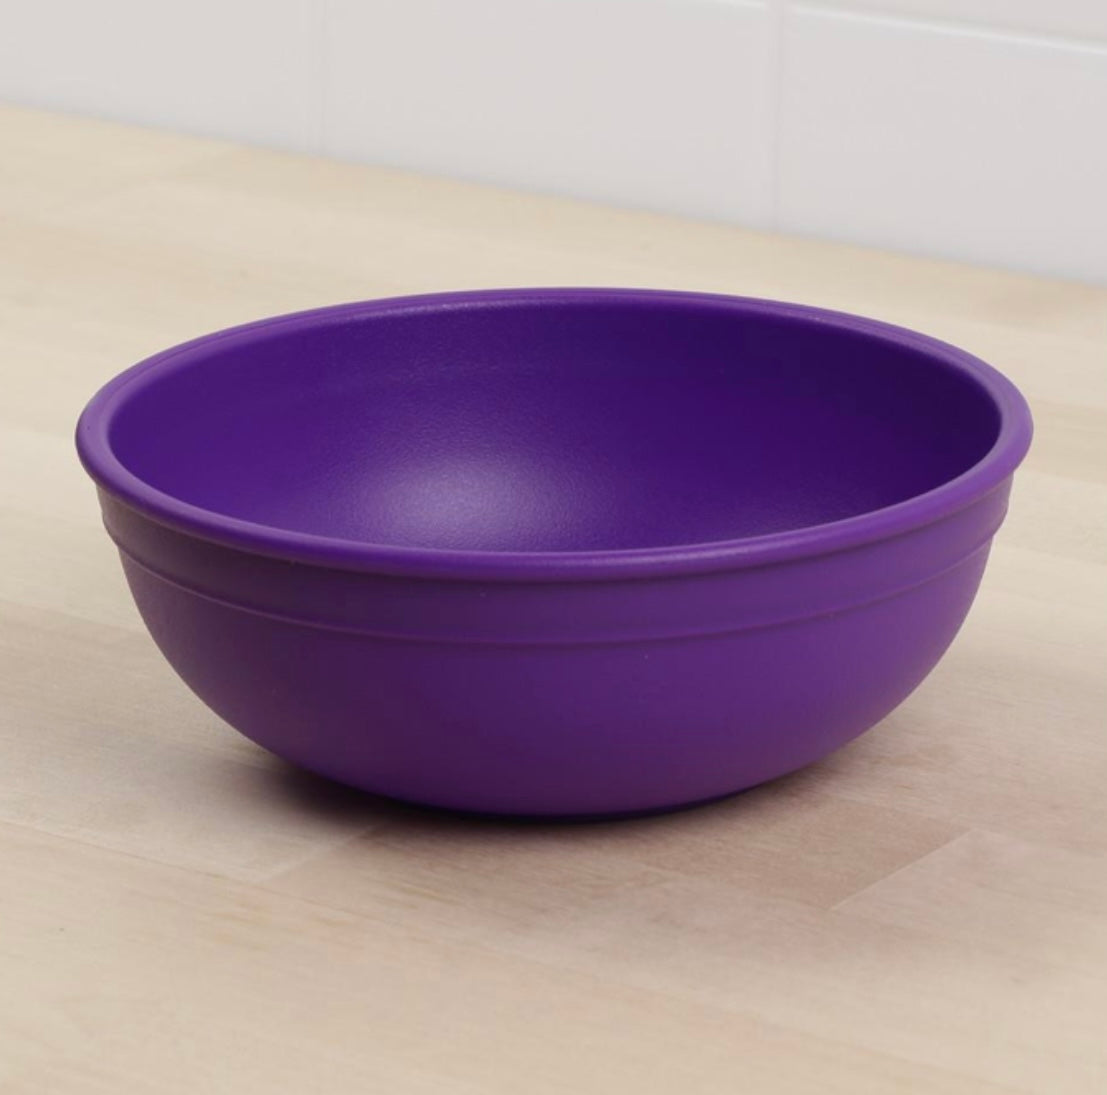 Re-Play Large Bowl - Amethyst